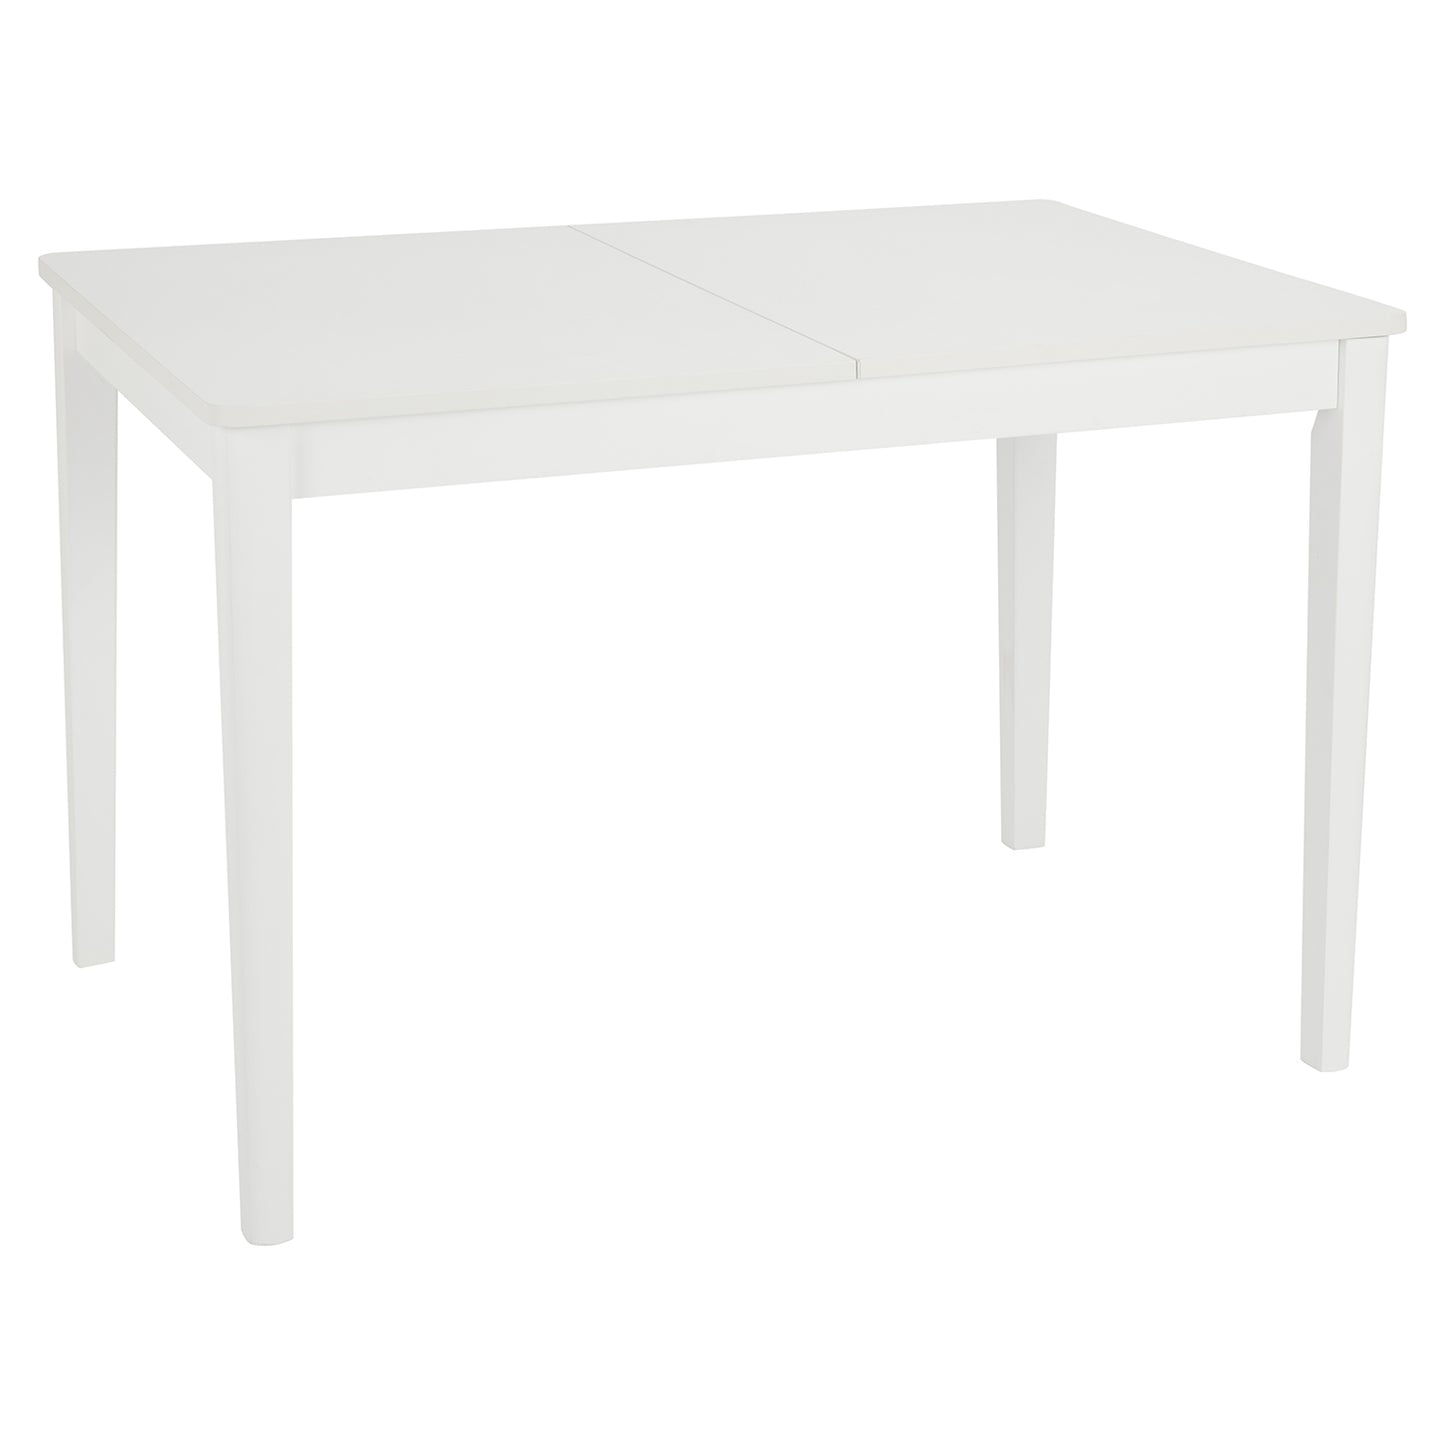 Paul extendable dining table with 4 chairs - large - white